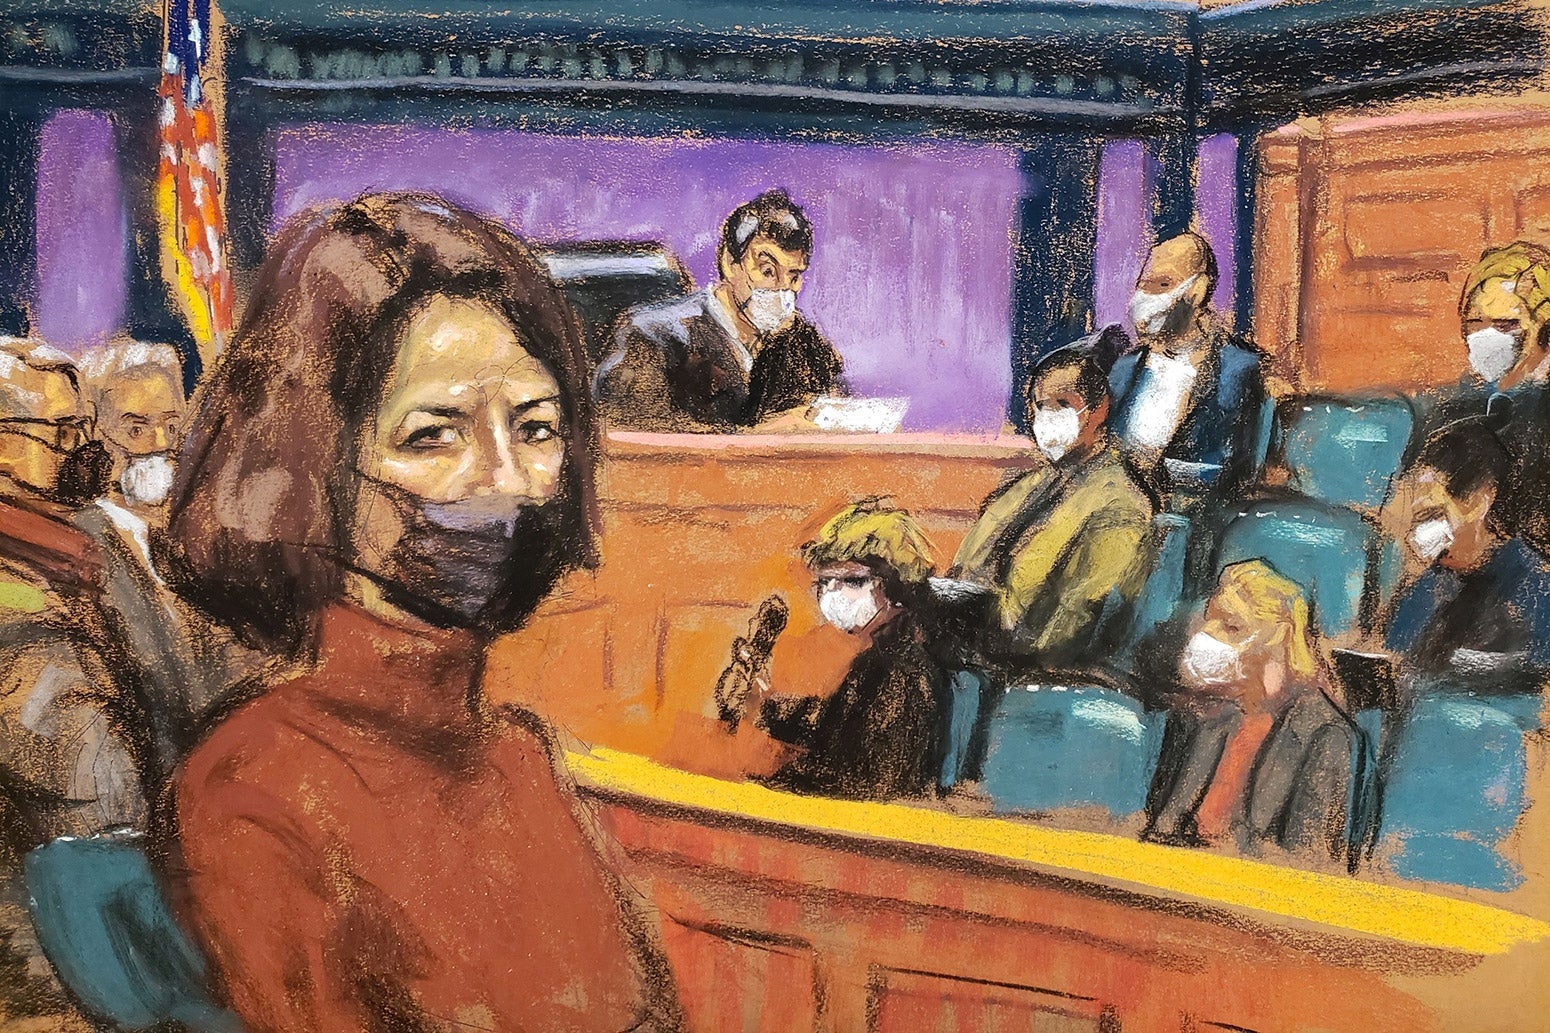 Courtroom sketch of Ghislaine Maxwell seated and listening as the guilty verdict in her trial is read